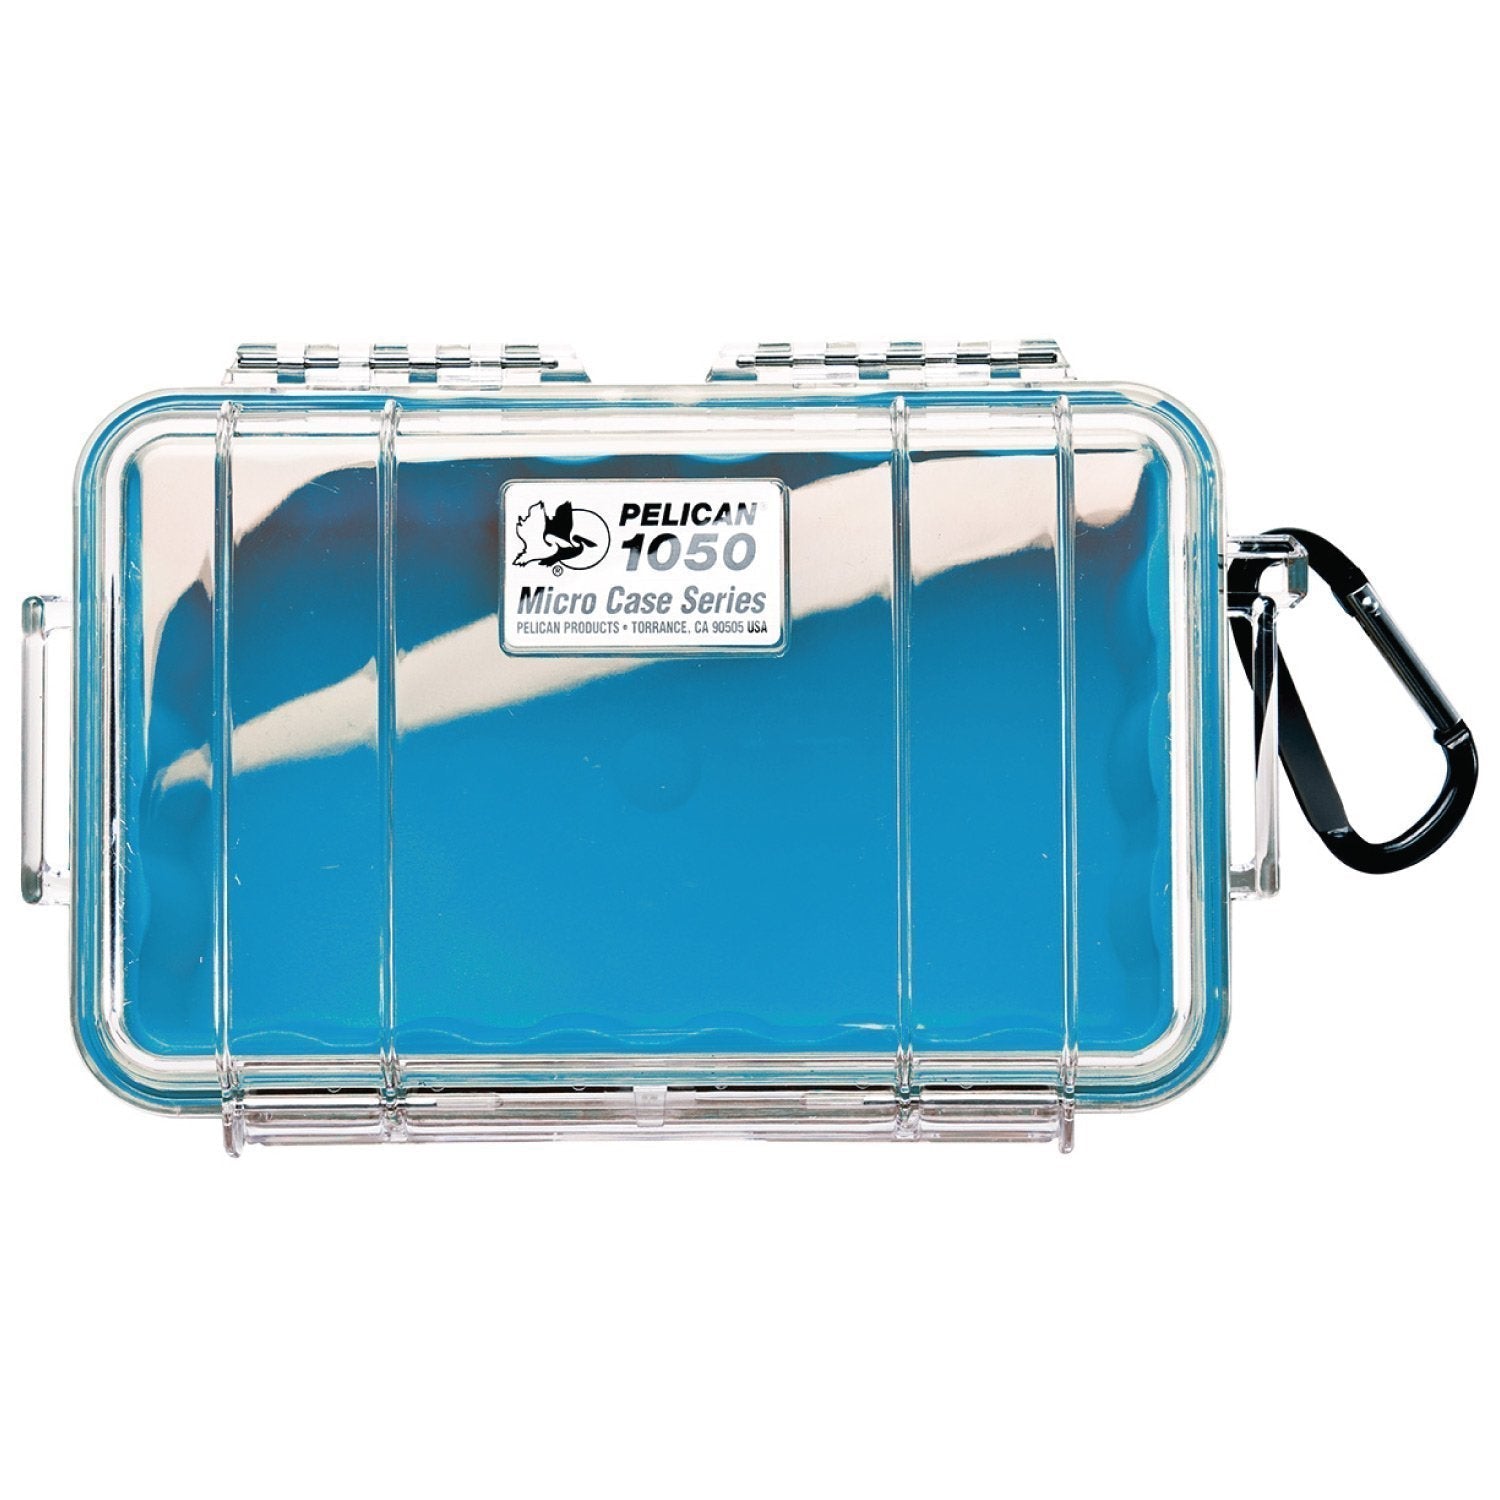 Pelican 1050 Micro Case Cases Pelican Products Clear Shell with Blue Liner Tactical Gear Supplier Tactical Distributors Australia